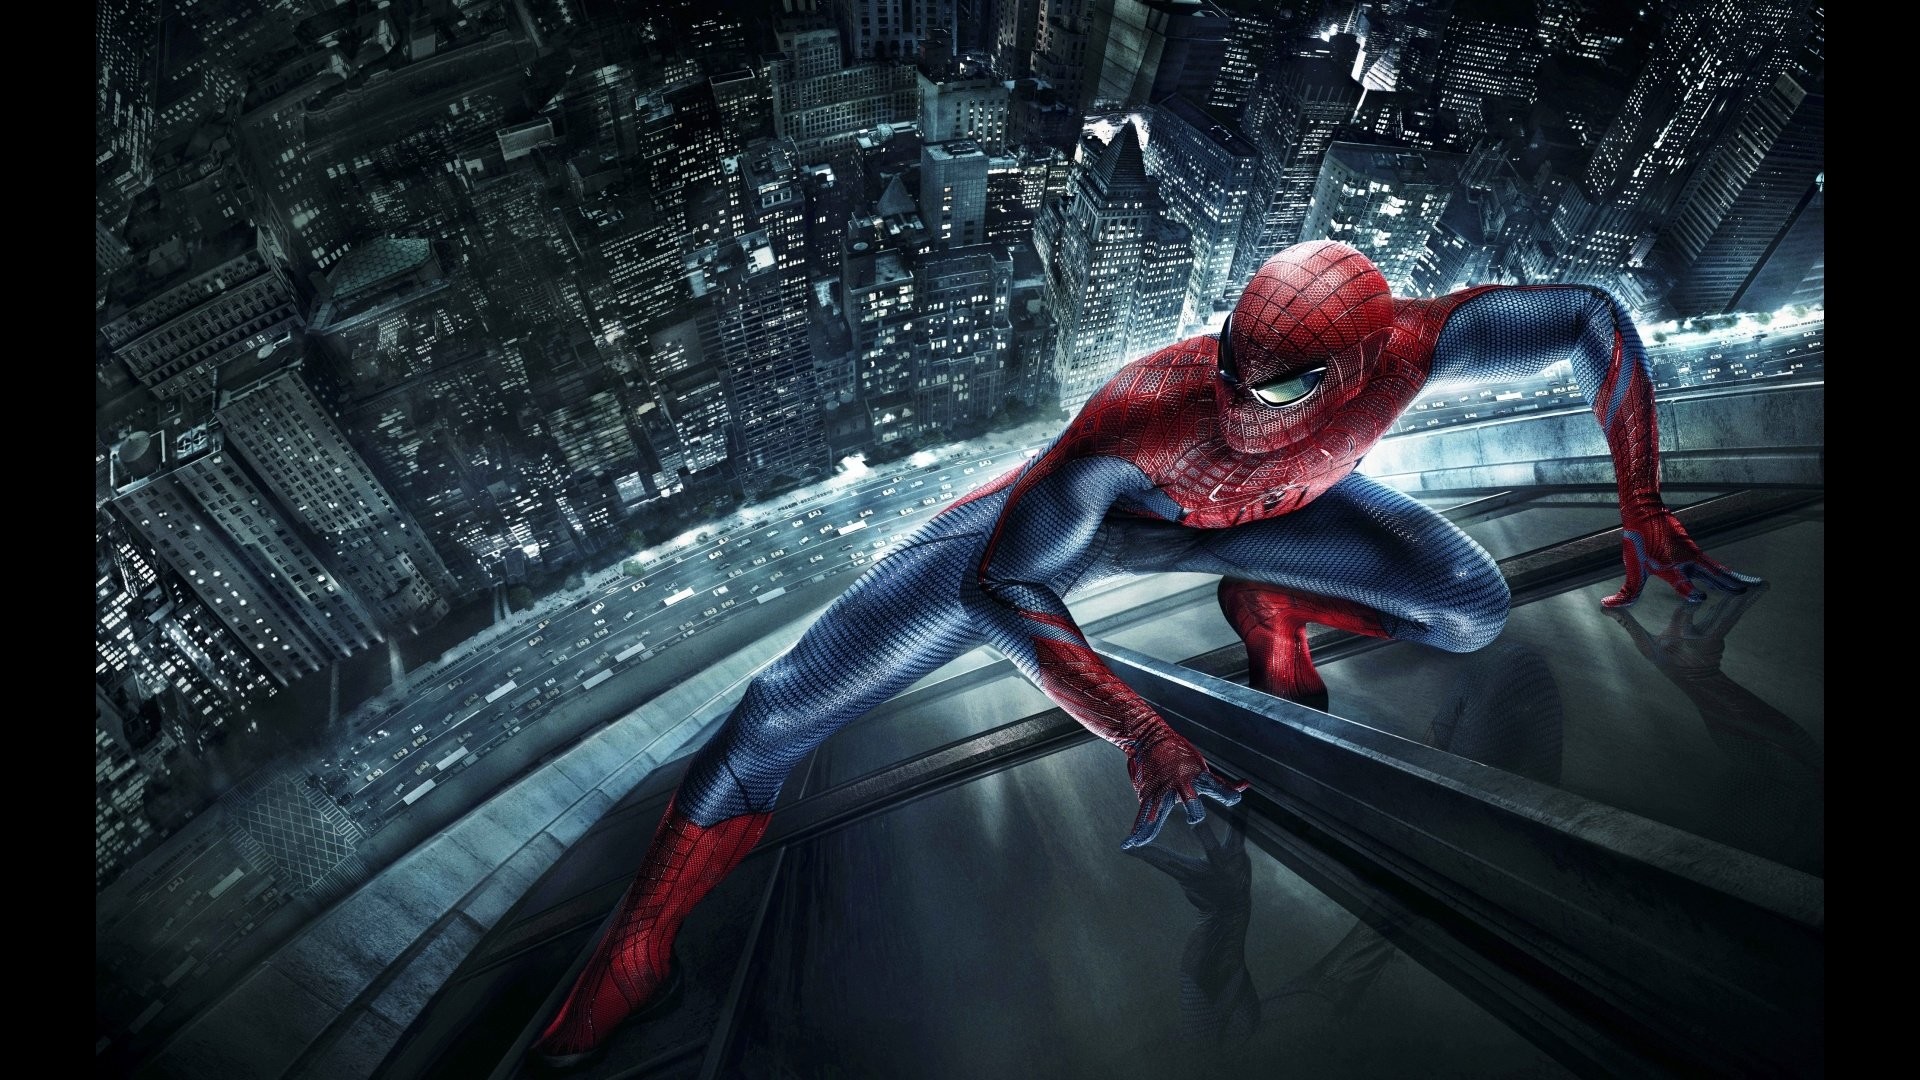 1920x1080 The 25+ best Spiderman hd ideas on Pinterest | Avengers hd, Andrew Garfield  sin camisa and Amazing spiderman